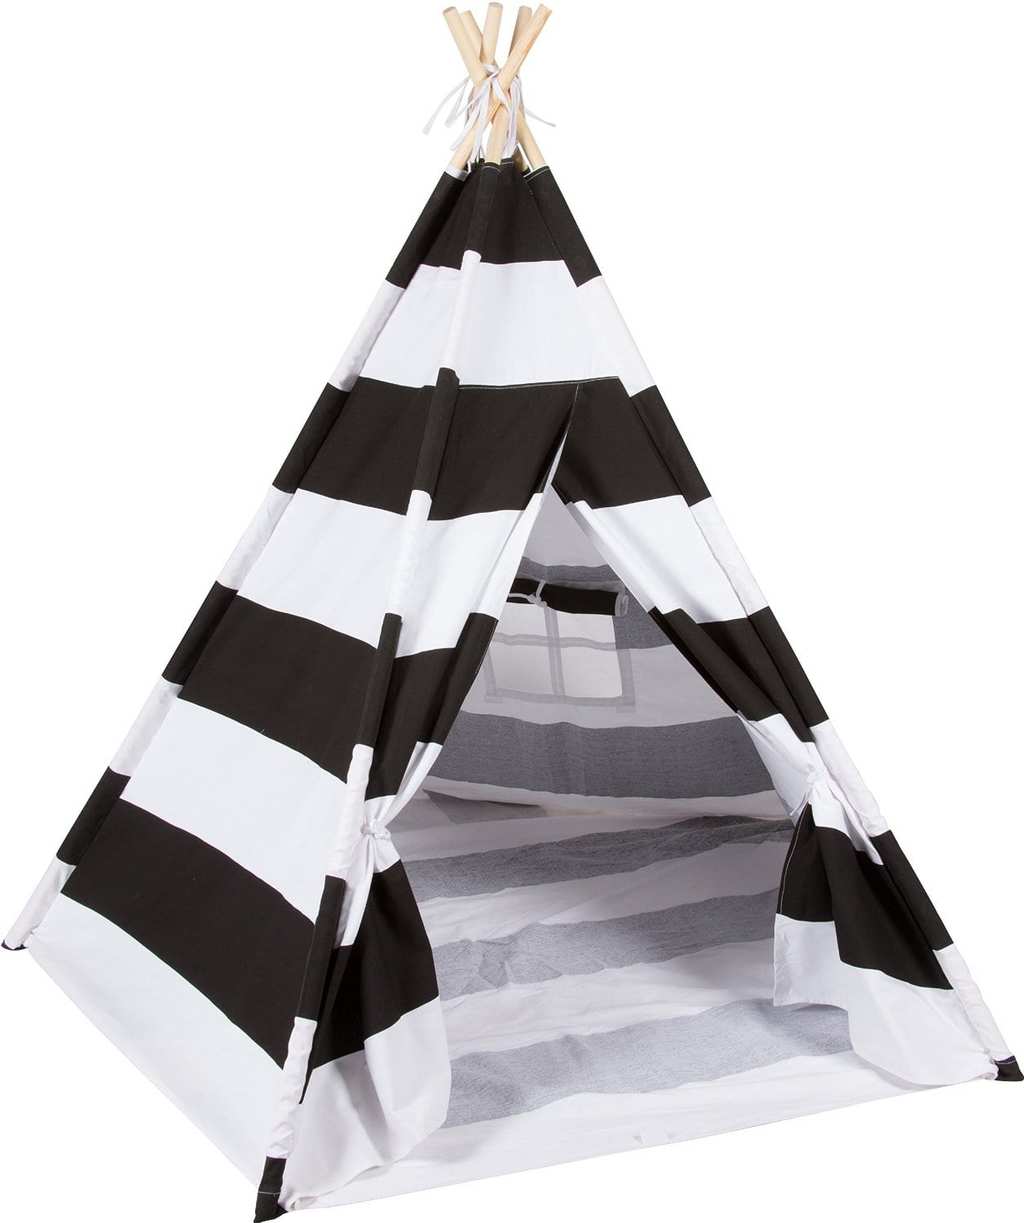 Black and White Striped Teepee